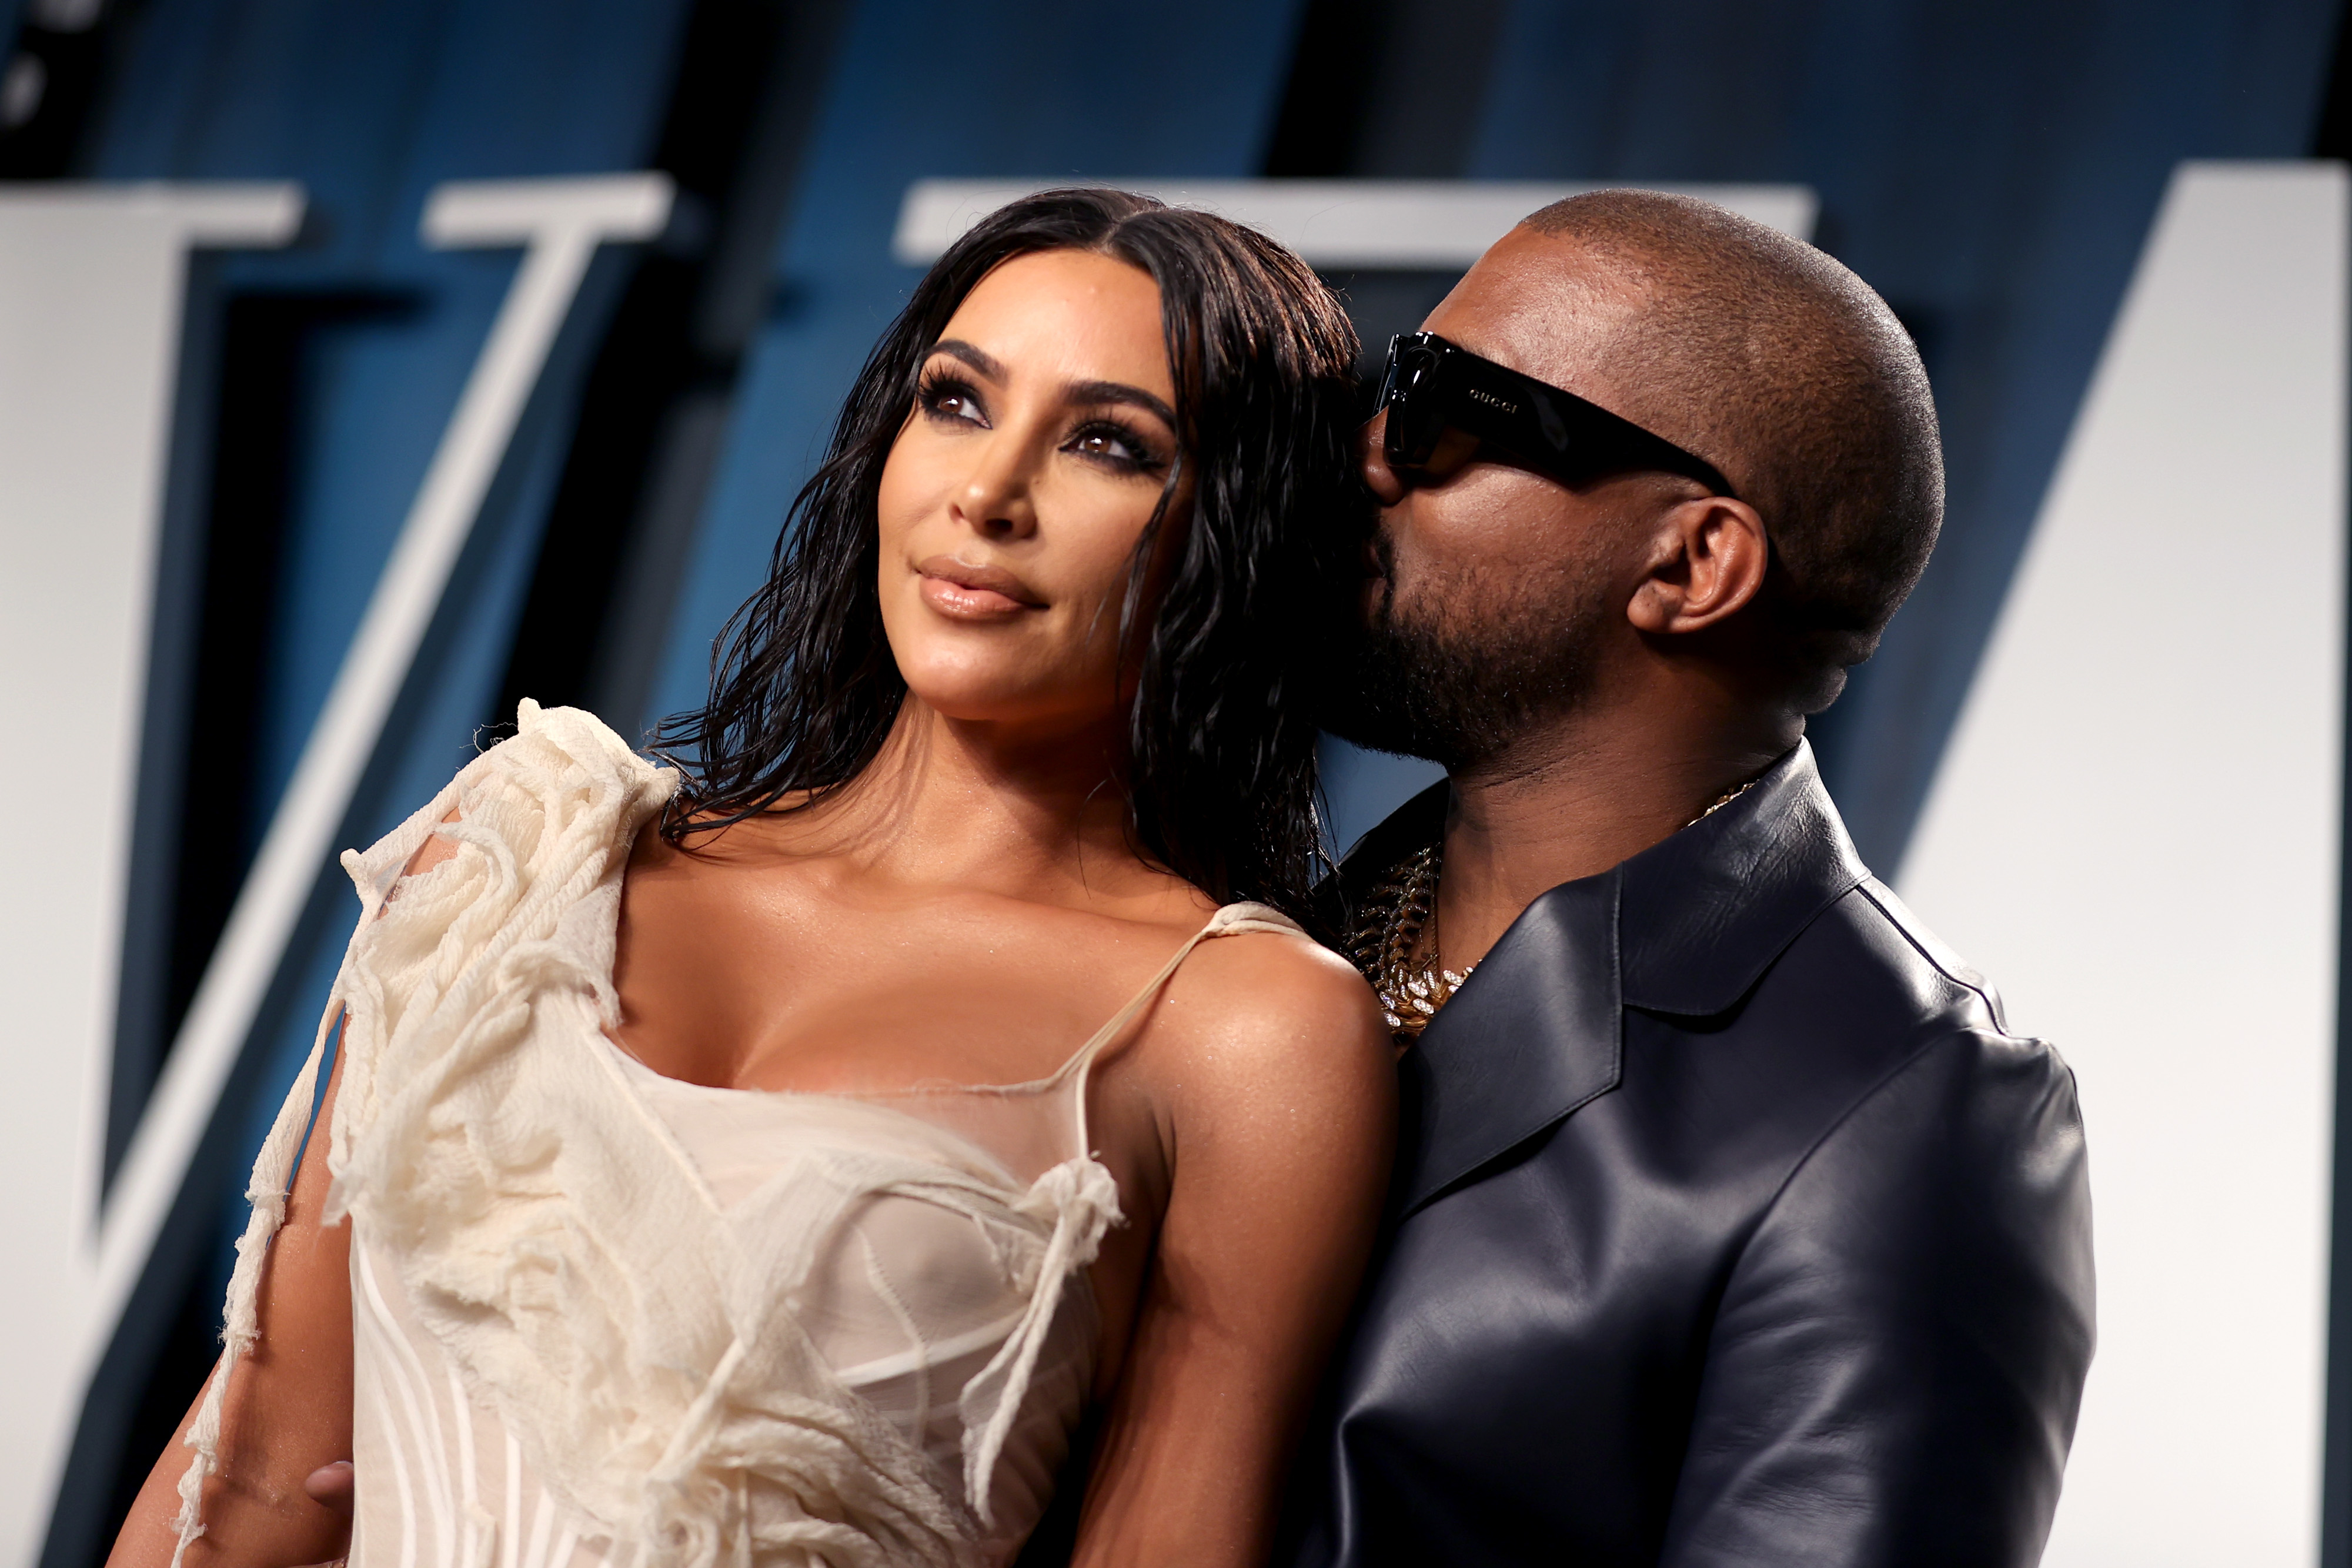 Kim and Ye at a media event